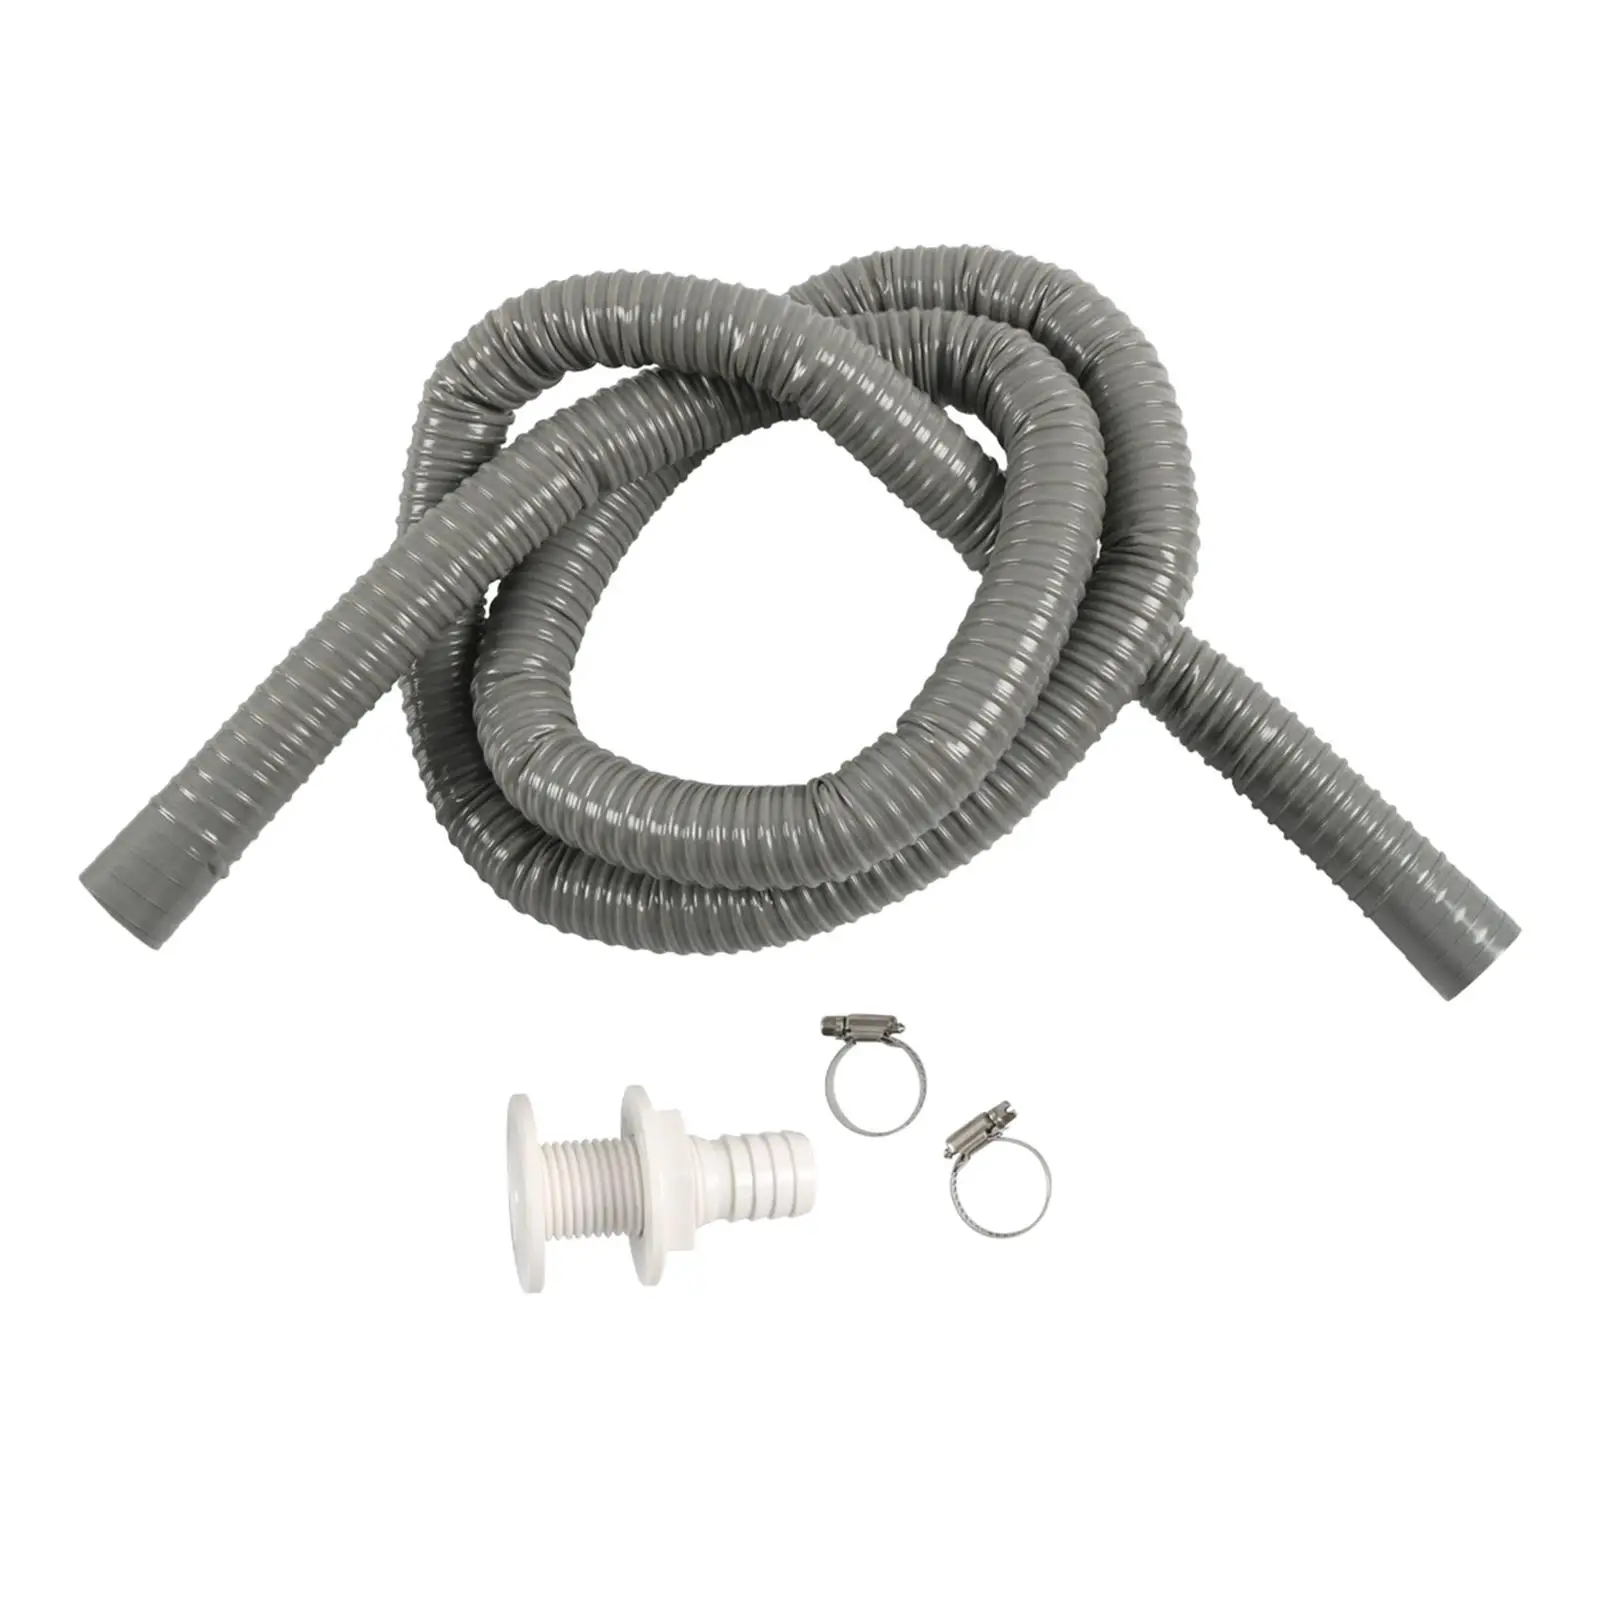 Marine Hose Bilge Pump Installation with thru Hull & 2 Clamps Kink Free 1-1/2-Inch Dia Plumbing Flexible for Boats